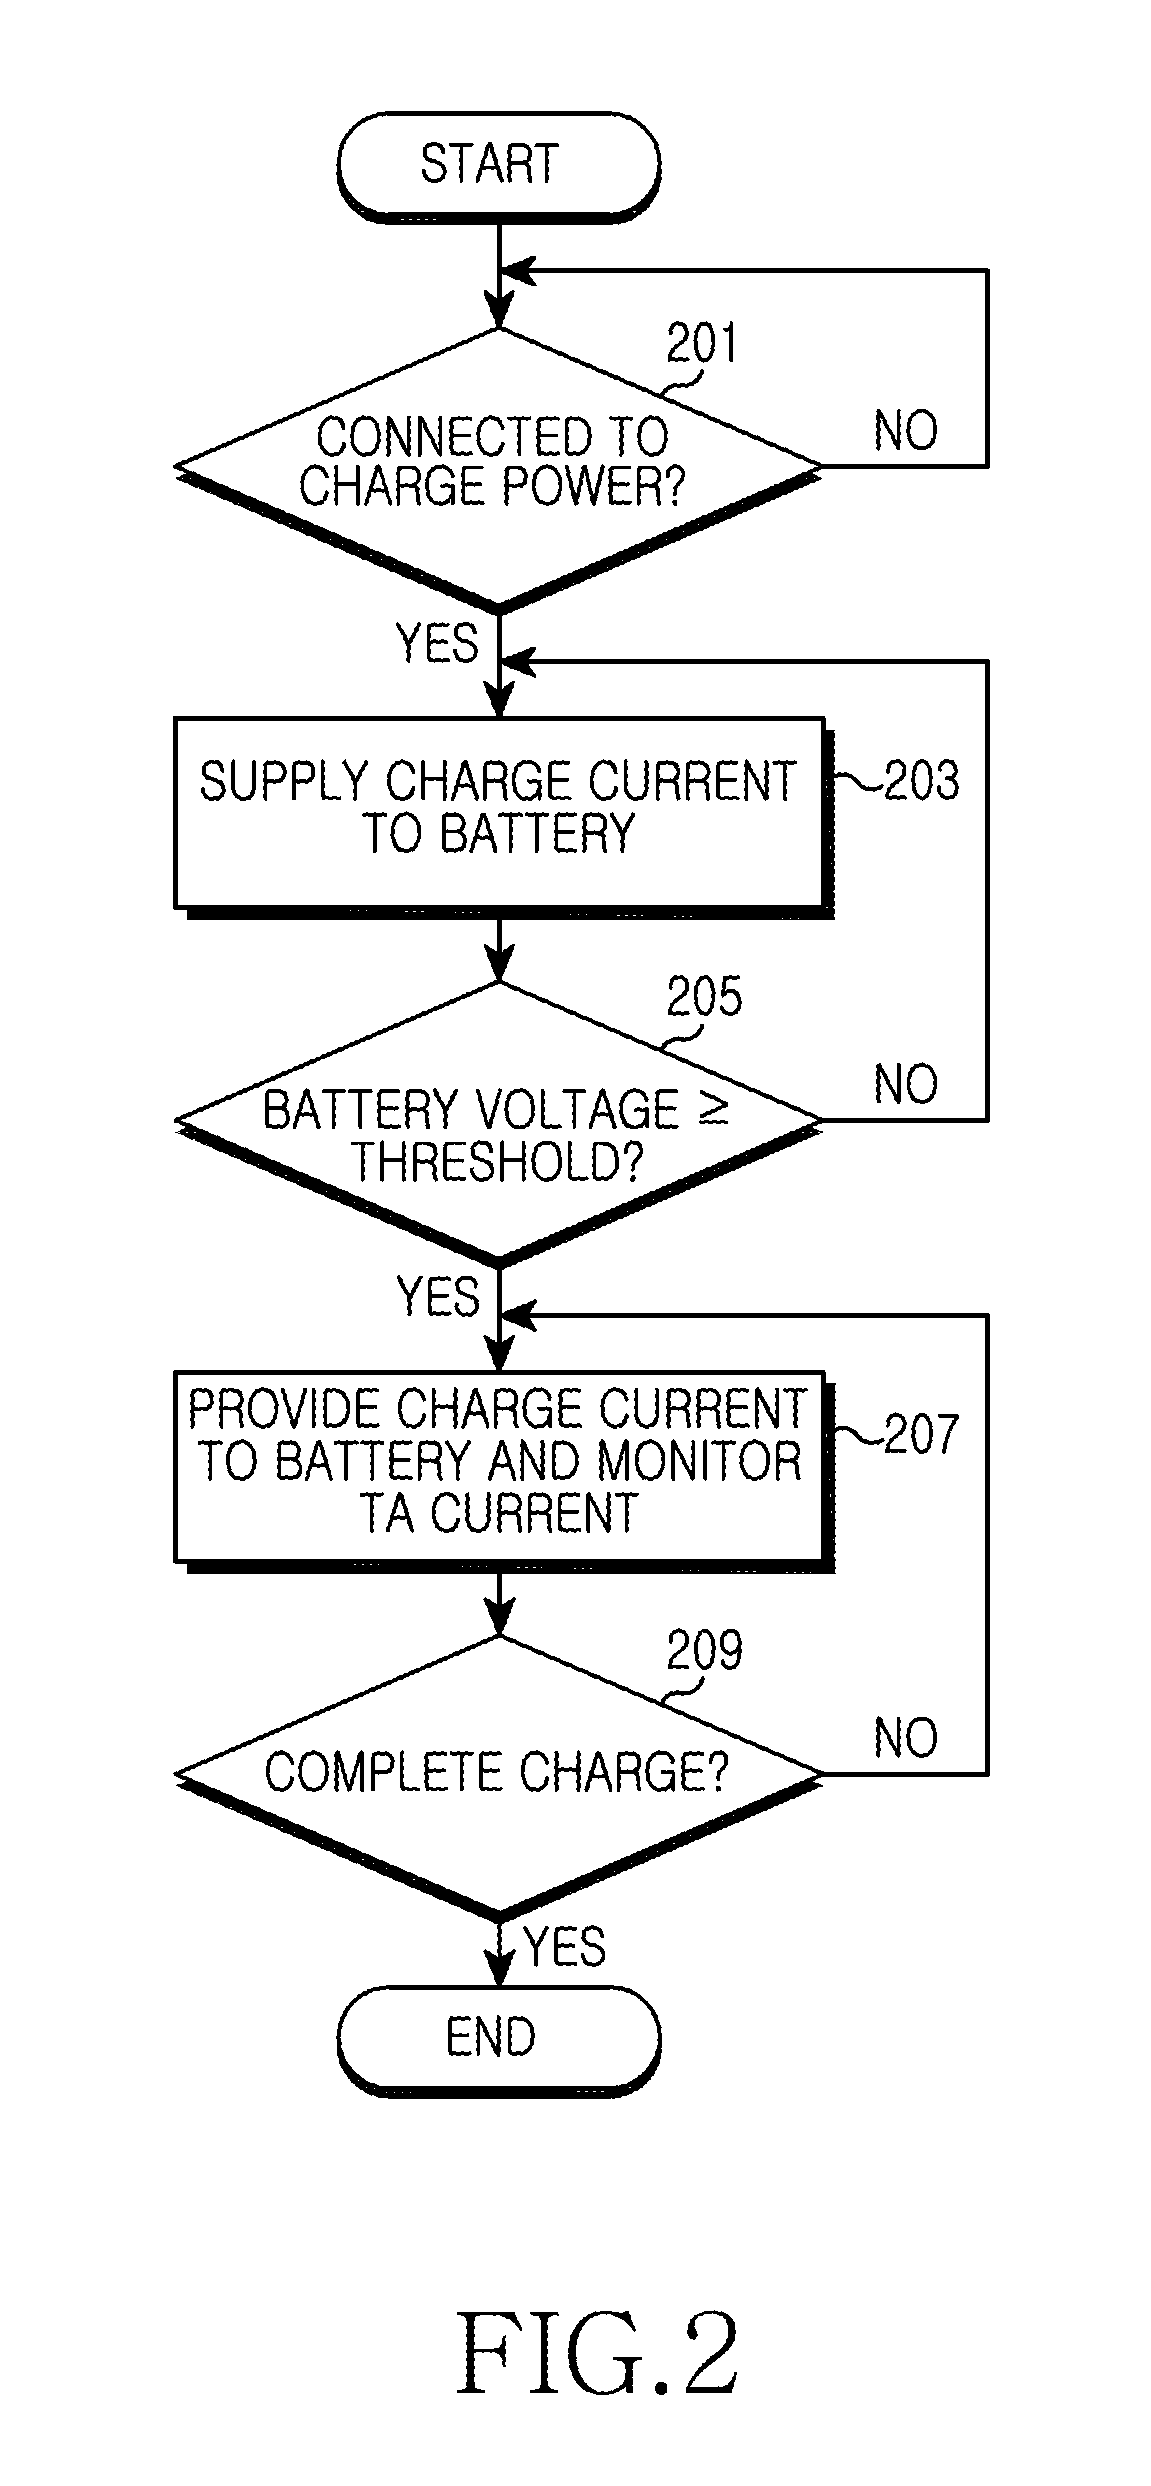 Apparatus and method for reducing time to charge battery in portable device